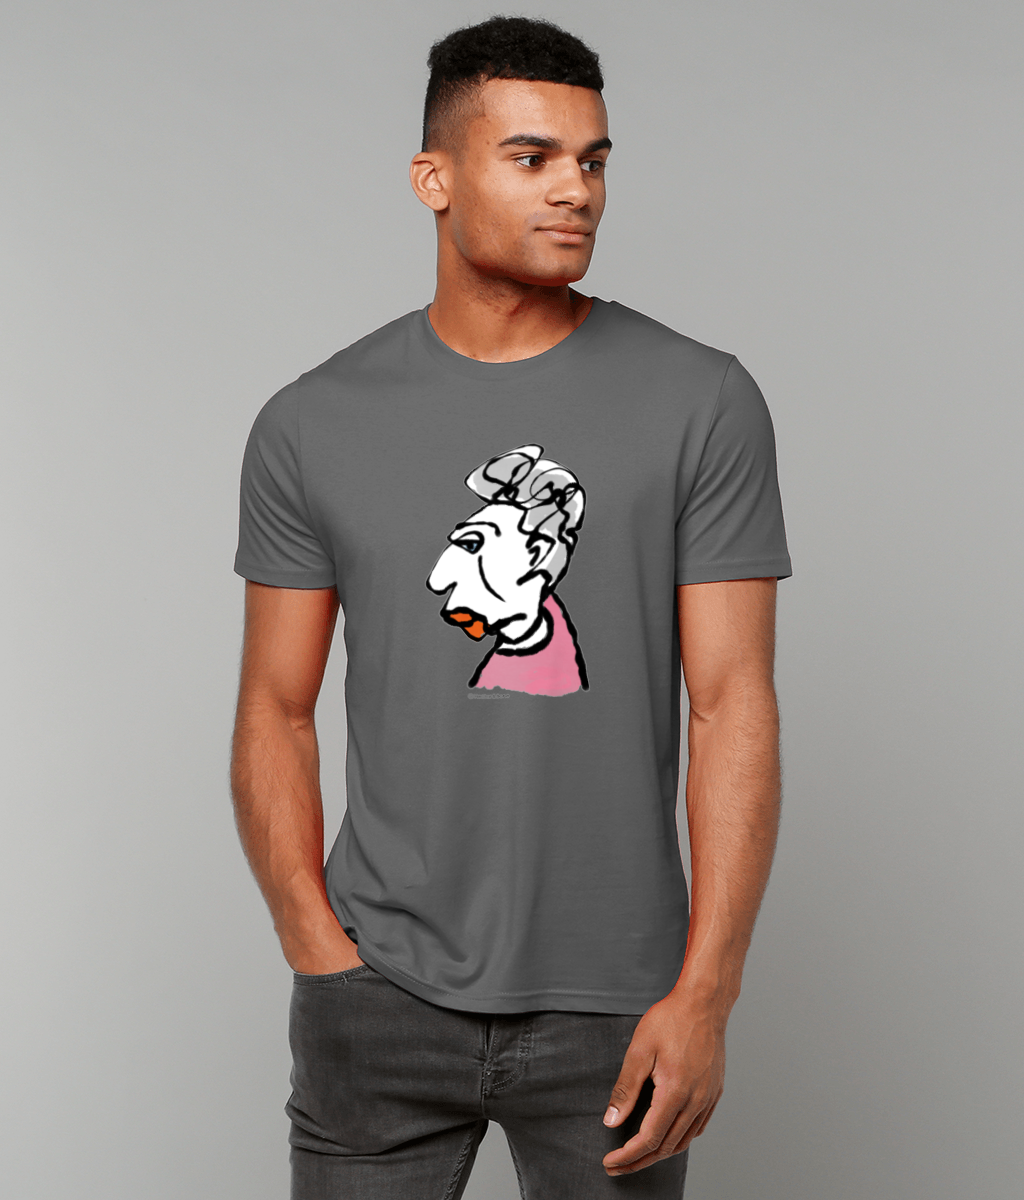 Glamorous Granny T-shirt - Young man wearing illustrated Glamorous Granny T-shirt on dark grey vegan cotton by Hector and Bone